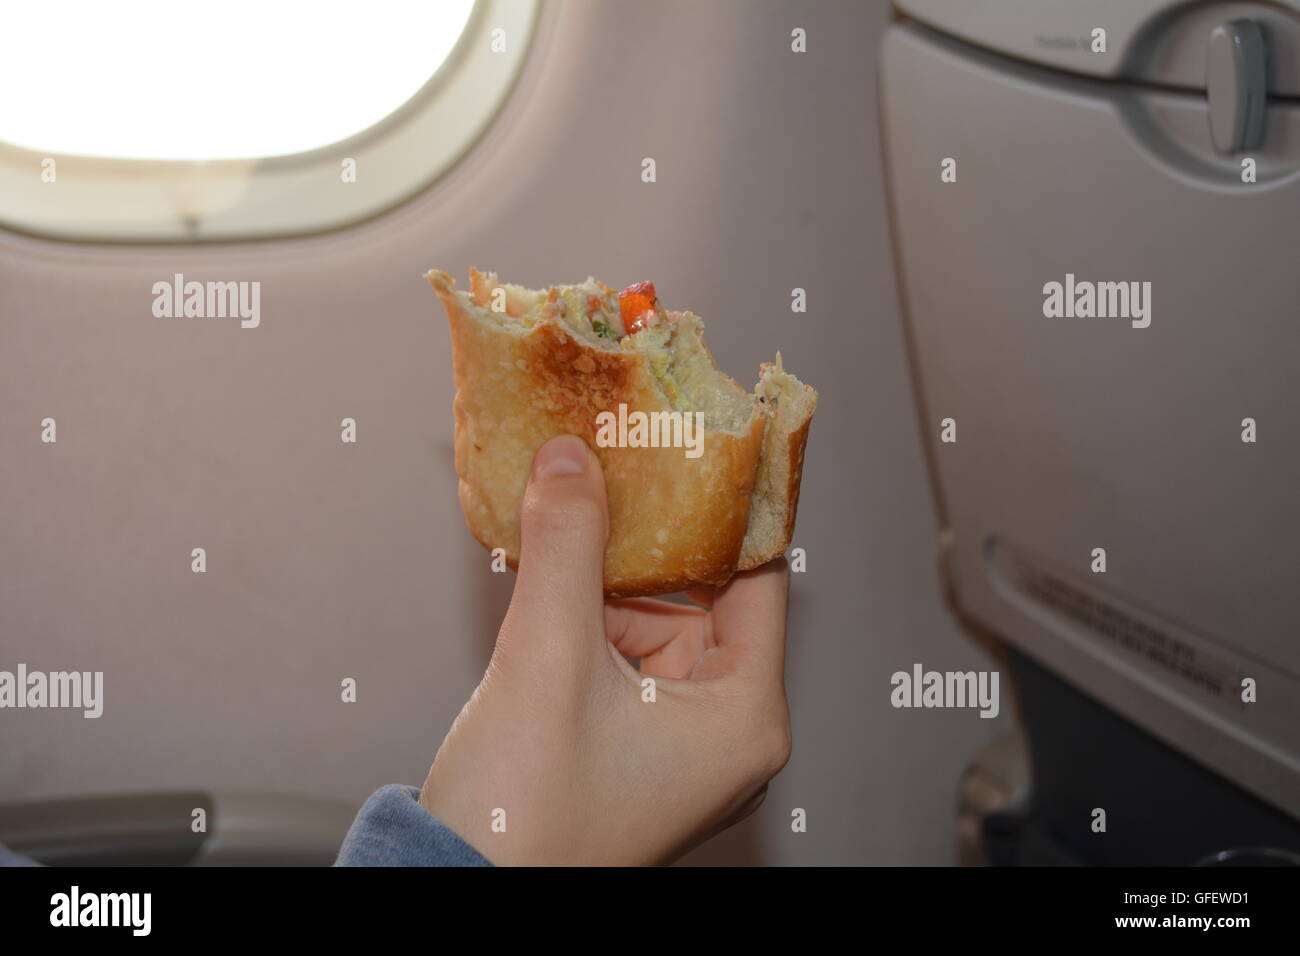 Sandwich. Girl's hand holding and showing half of a homemade sandwich in the plane. Stock Photo